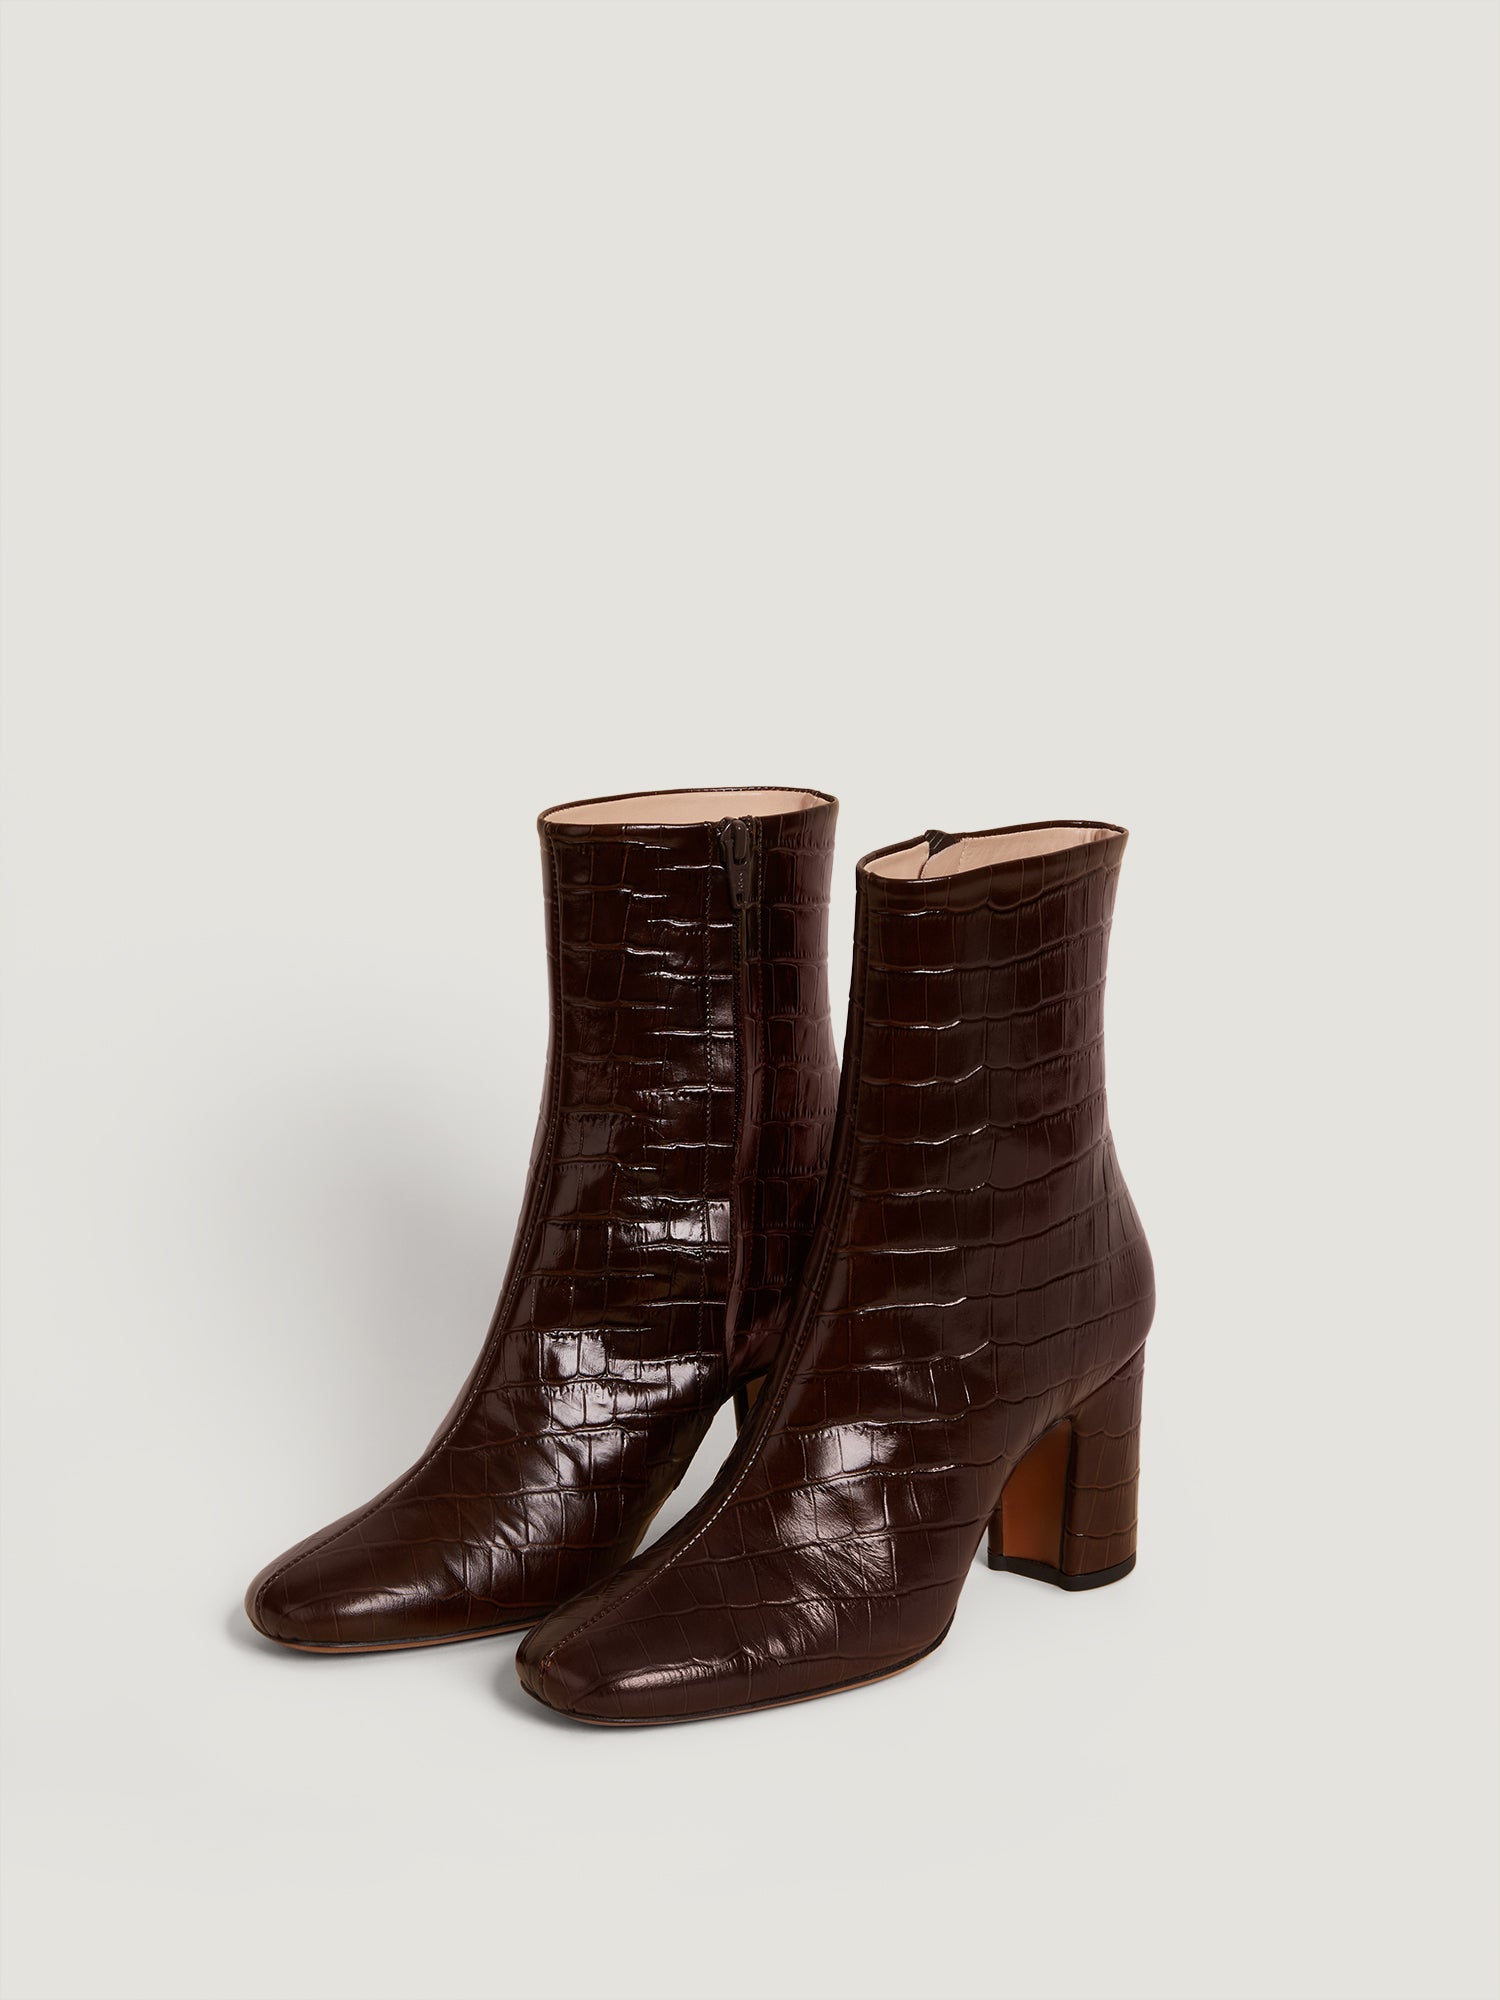 Ankle boots in croco-like chocolate leather | Rouje • Rouje Paris